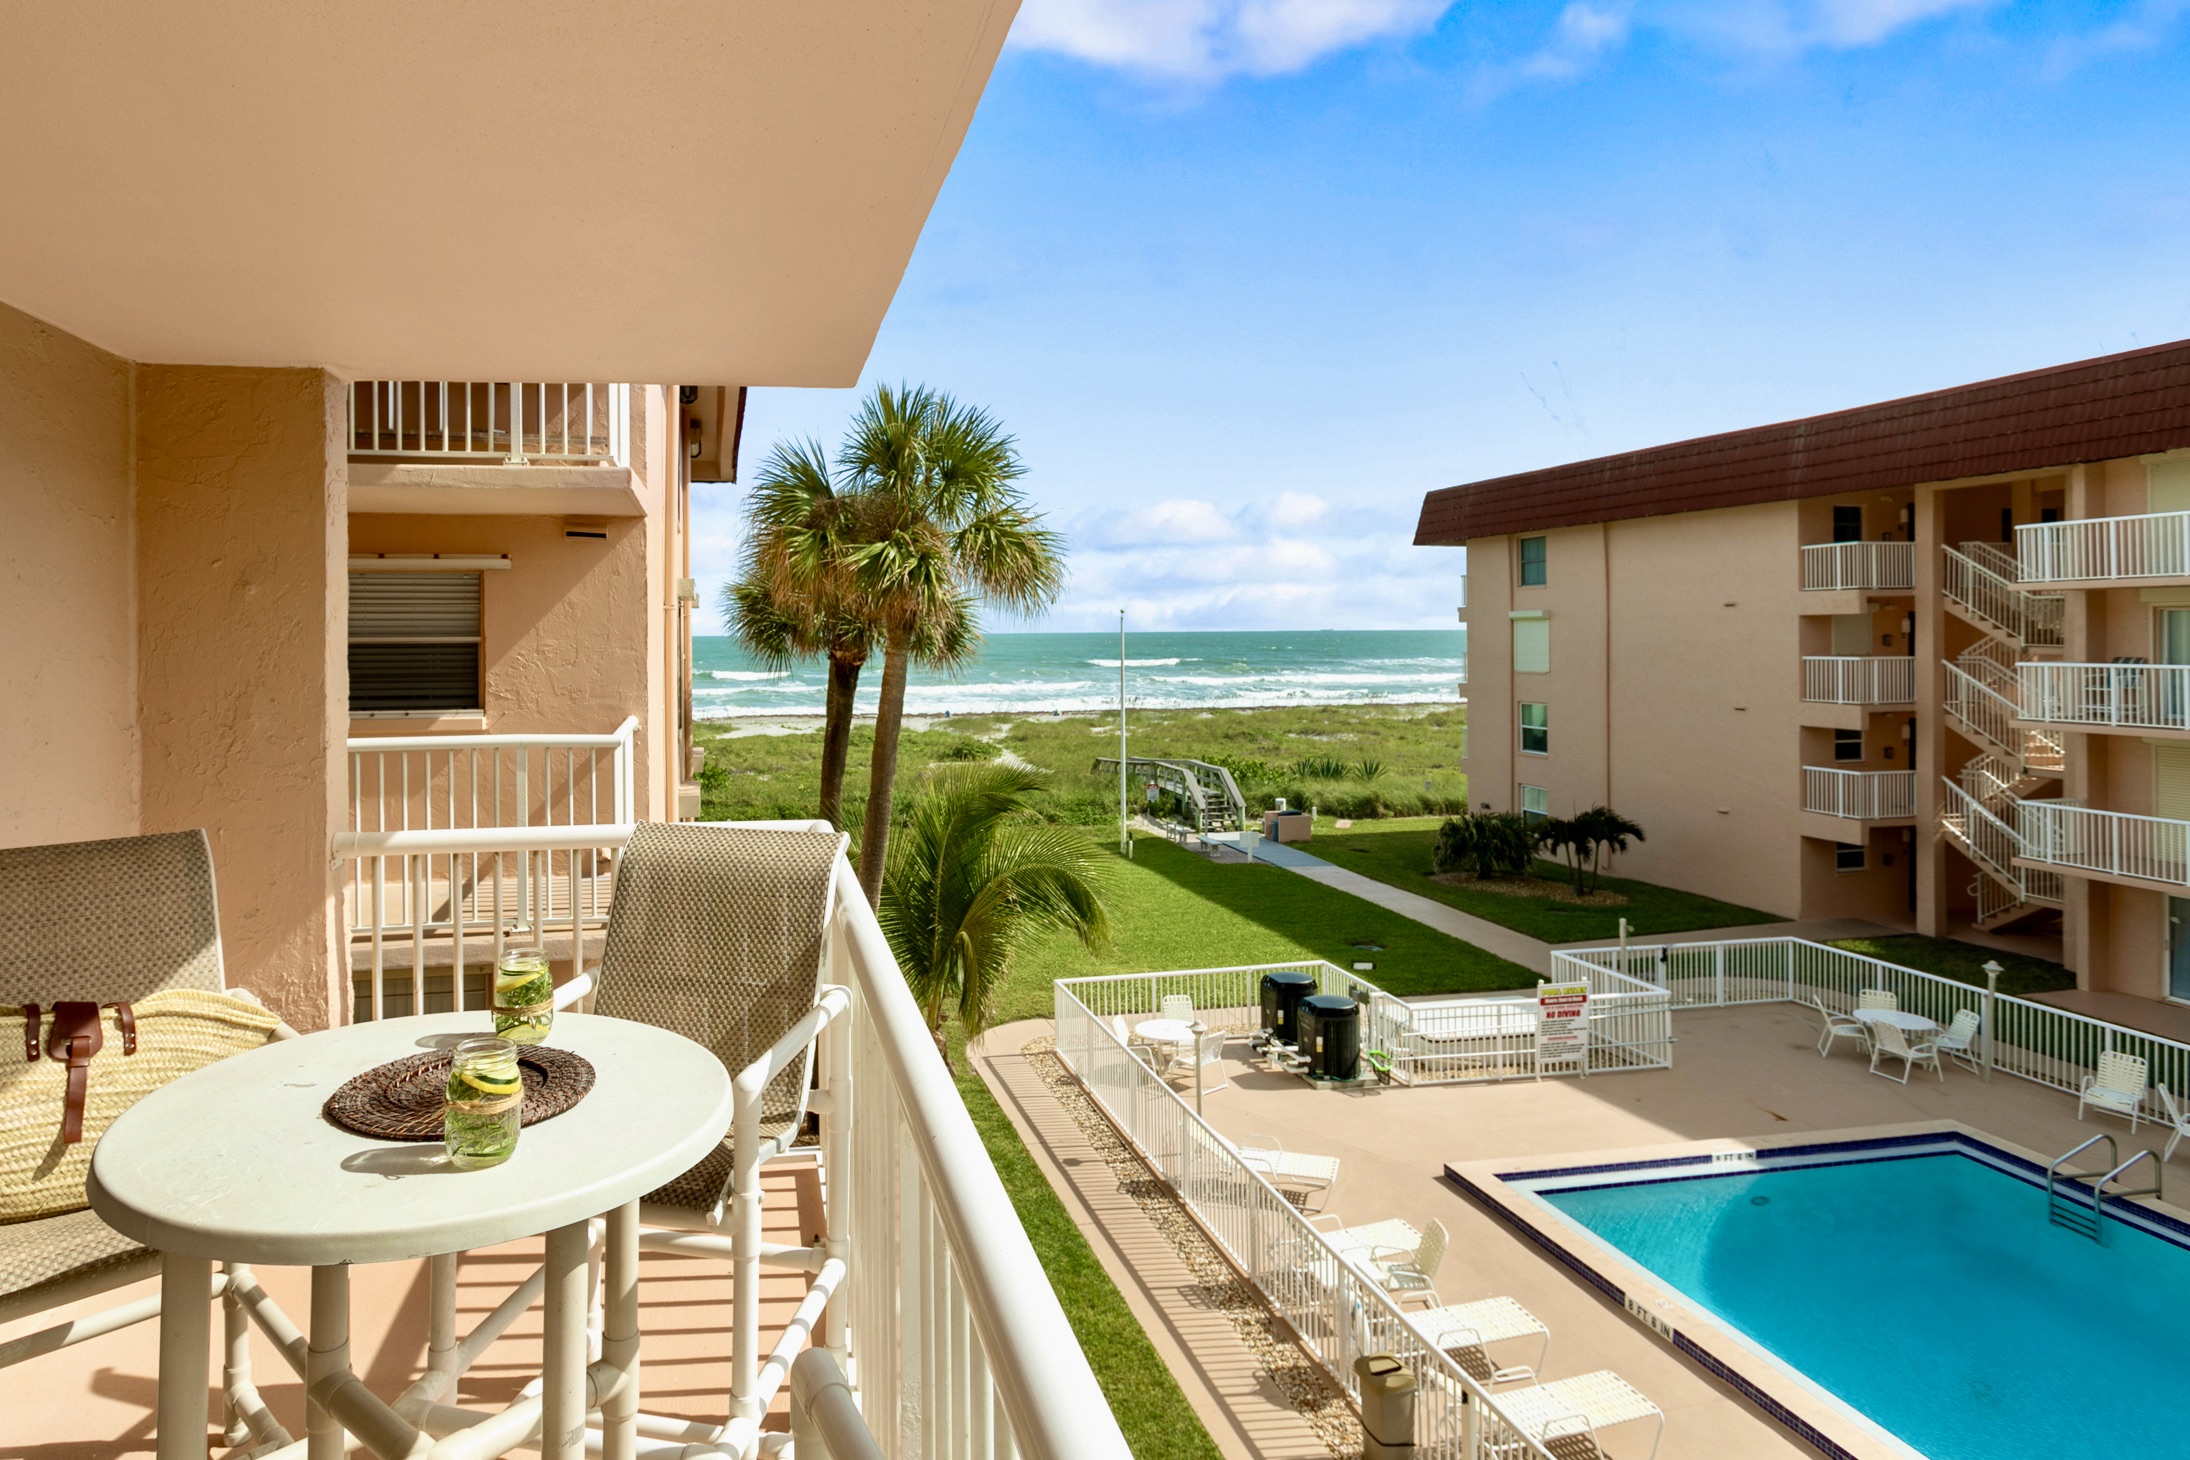 Enjoy your sun exposed balcony with views of the pool and ocean.